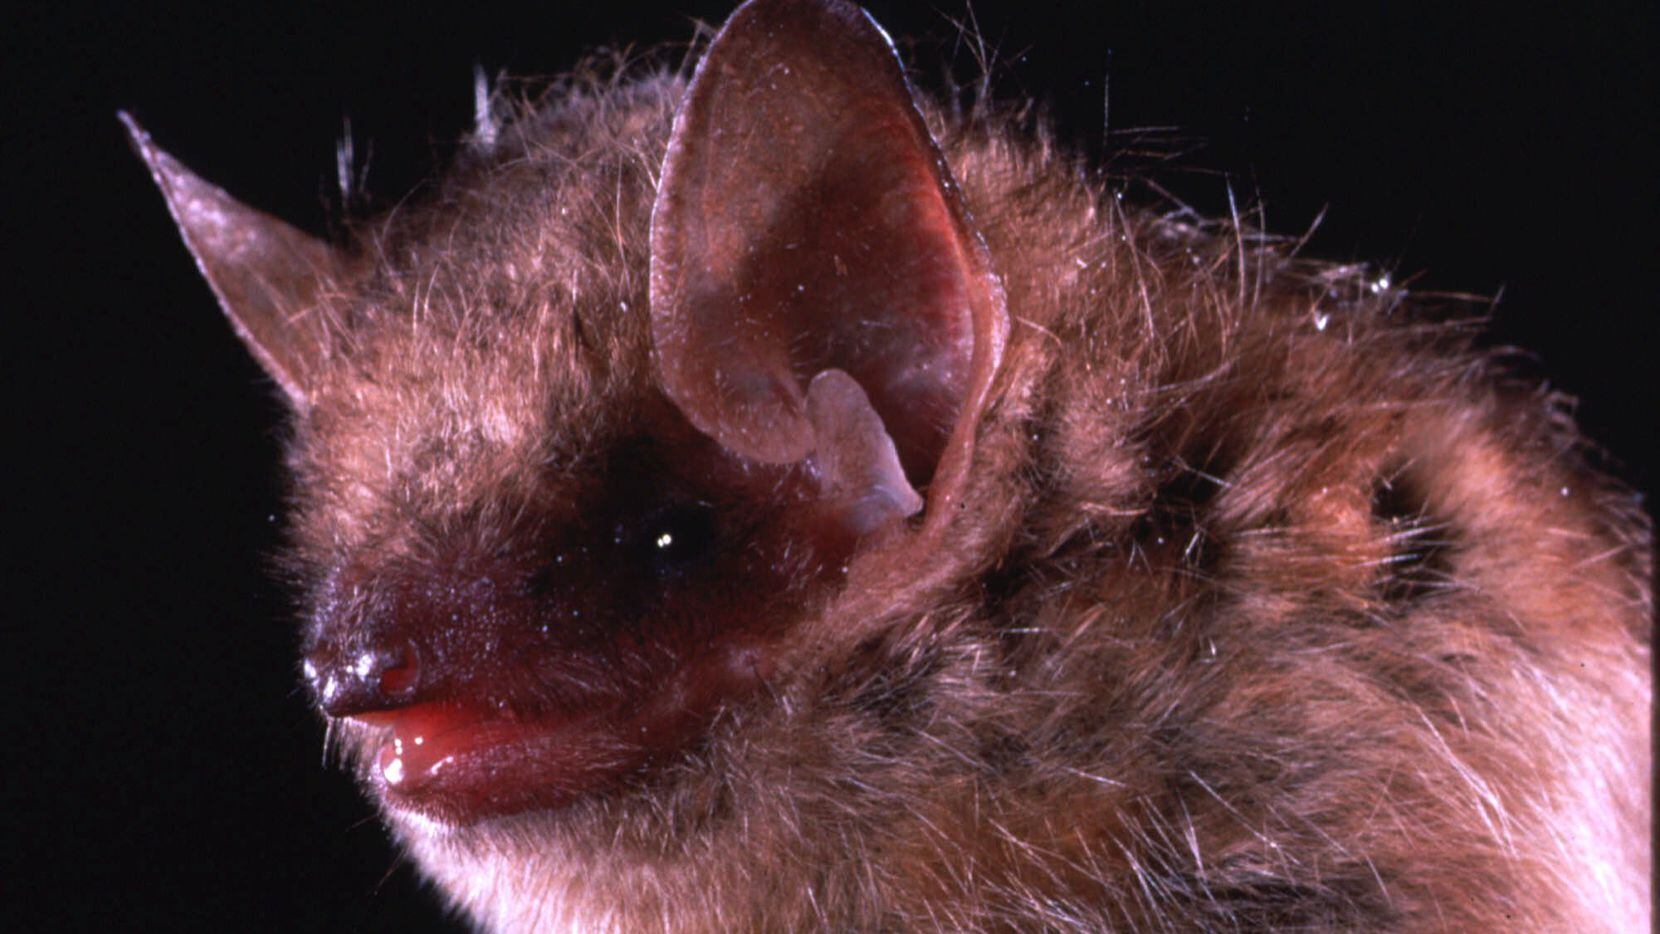 Pictured is an eastern pipistrelle bat, a species that is frequently linked with human rabies cases.